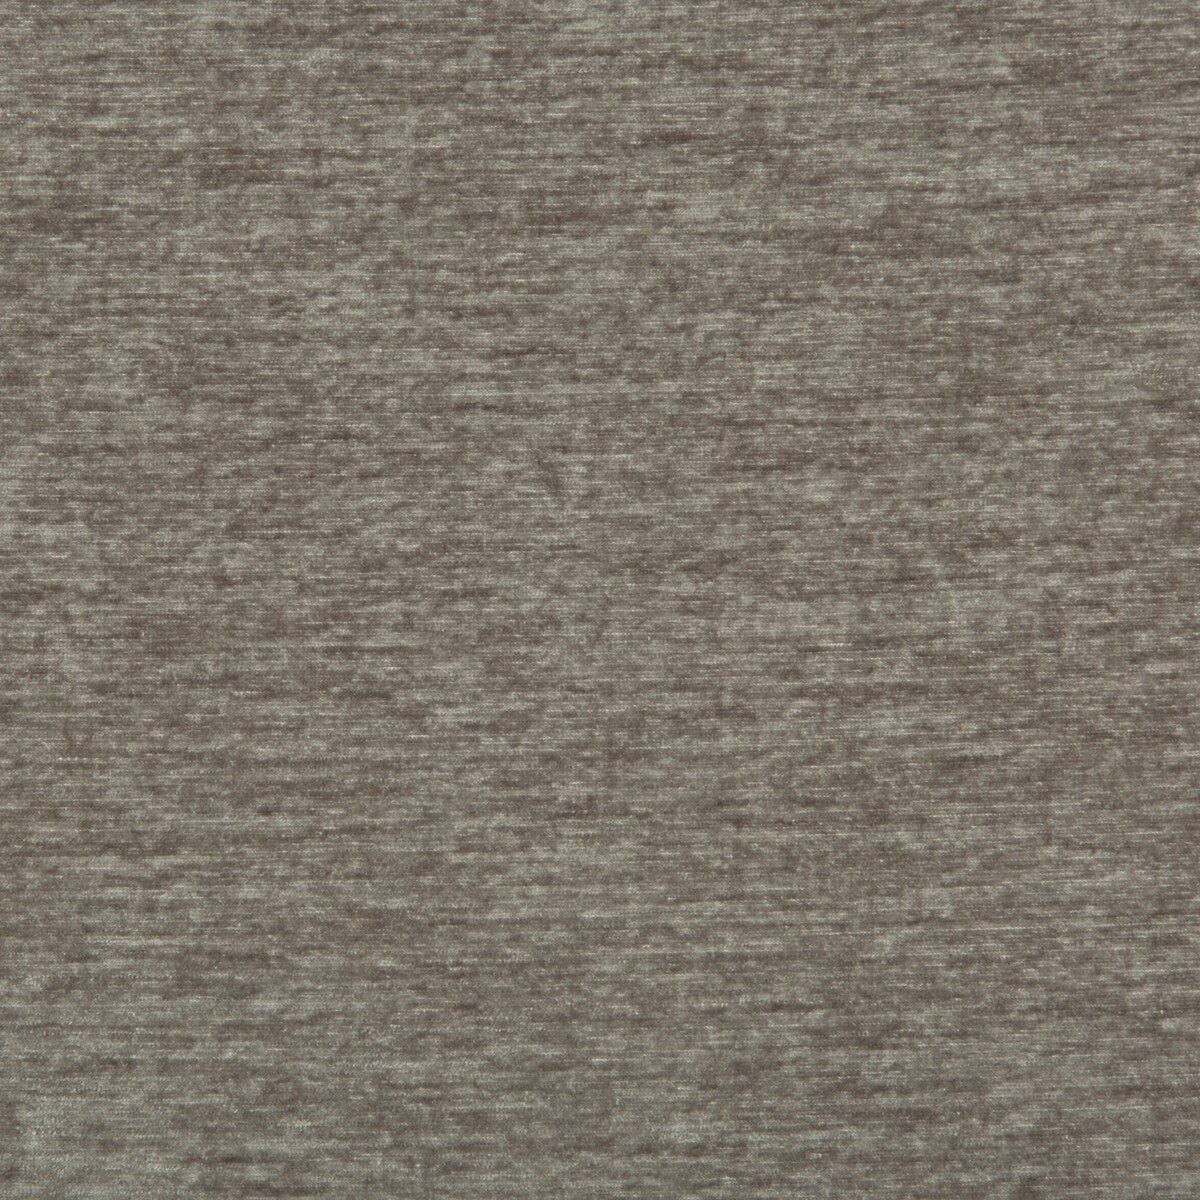 Kravet Contract fabric in 35406-11 color - pattern 35406.11.0 - by Kravet Contract in the Crypton Incase collection